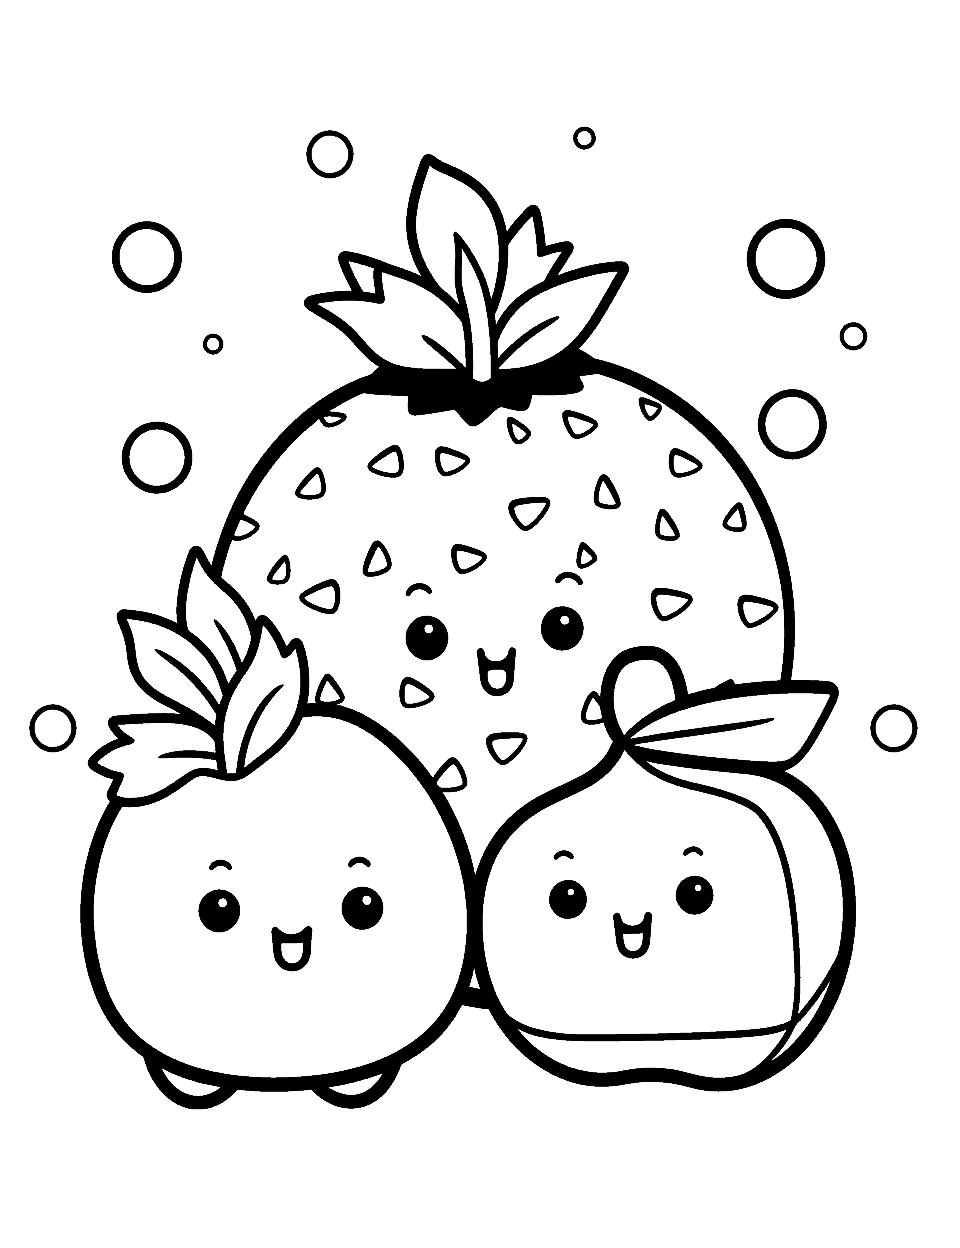 Easy-to-Color Doodle Fruits Kawaii Coloring Page - A simple doodle of assorted cute, smiling fruits for beginners to enjoy coloring.